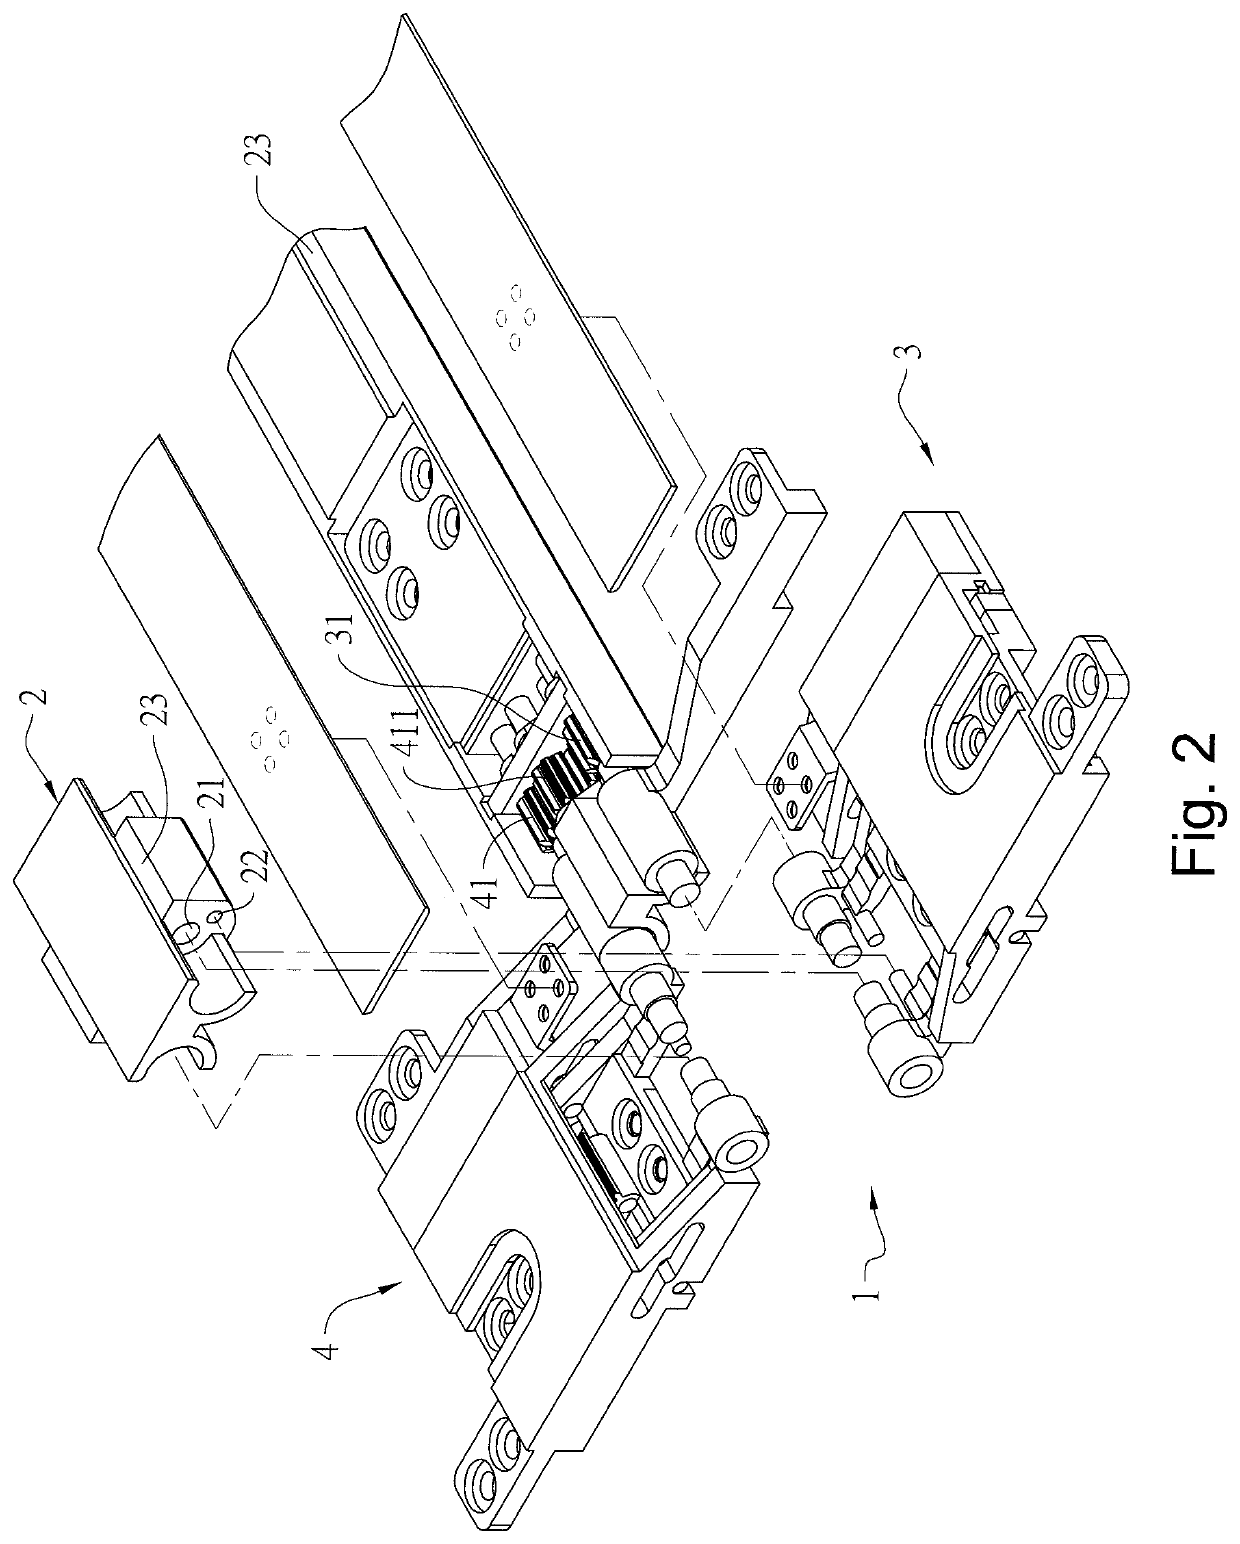 Hinge module for a foldable type device